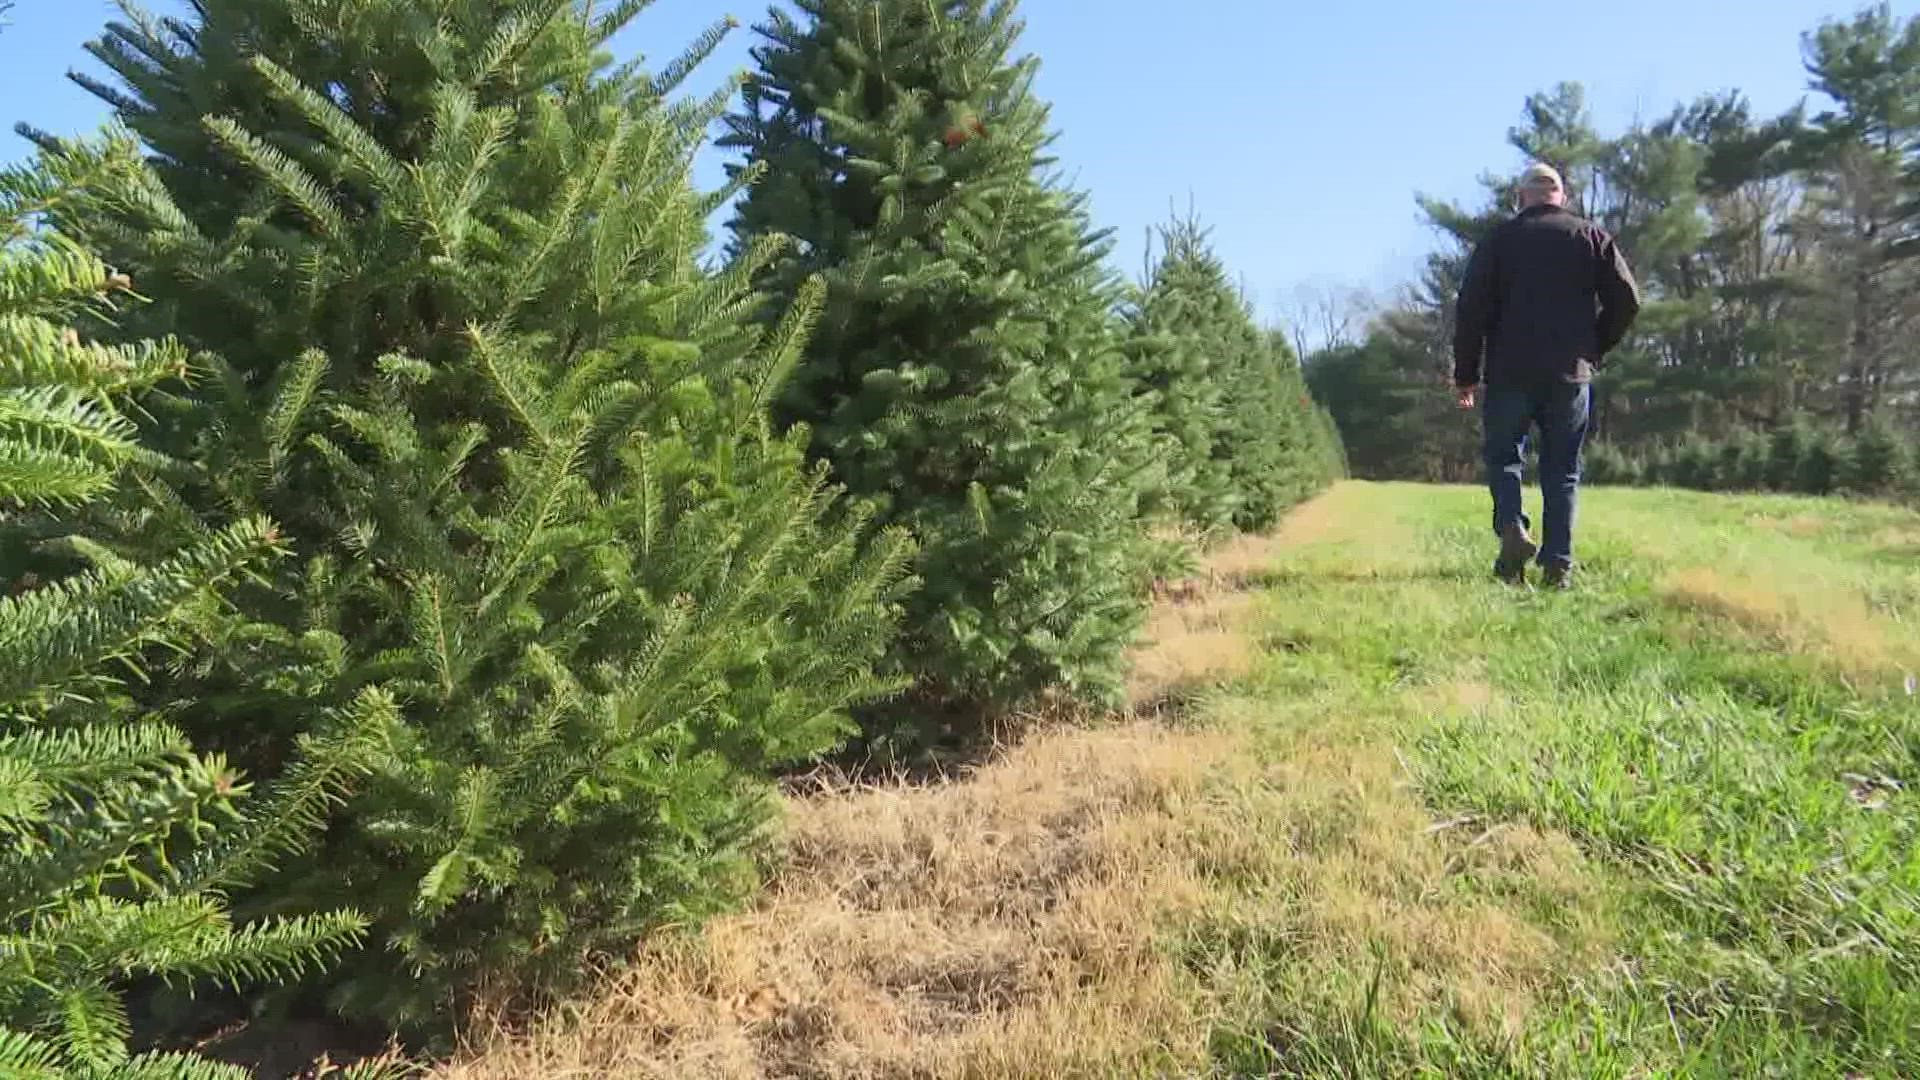 Christmas tree farms aren't immune the inflation currently affecting other segments of the economy.